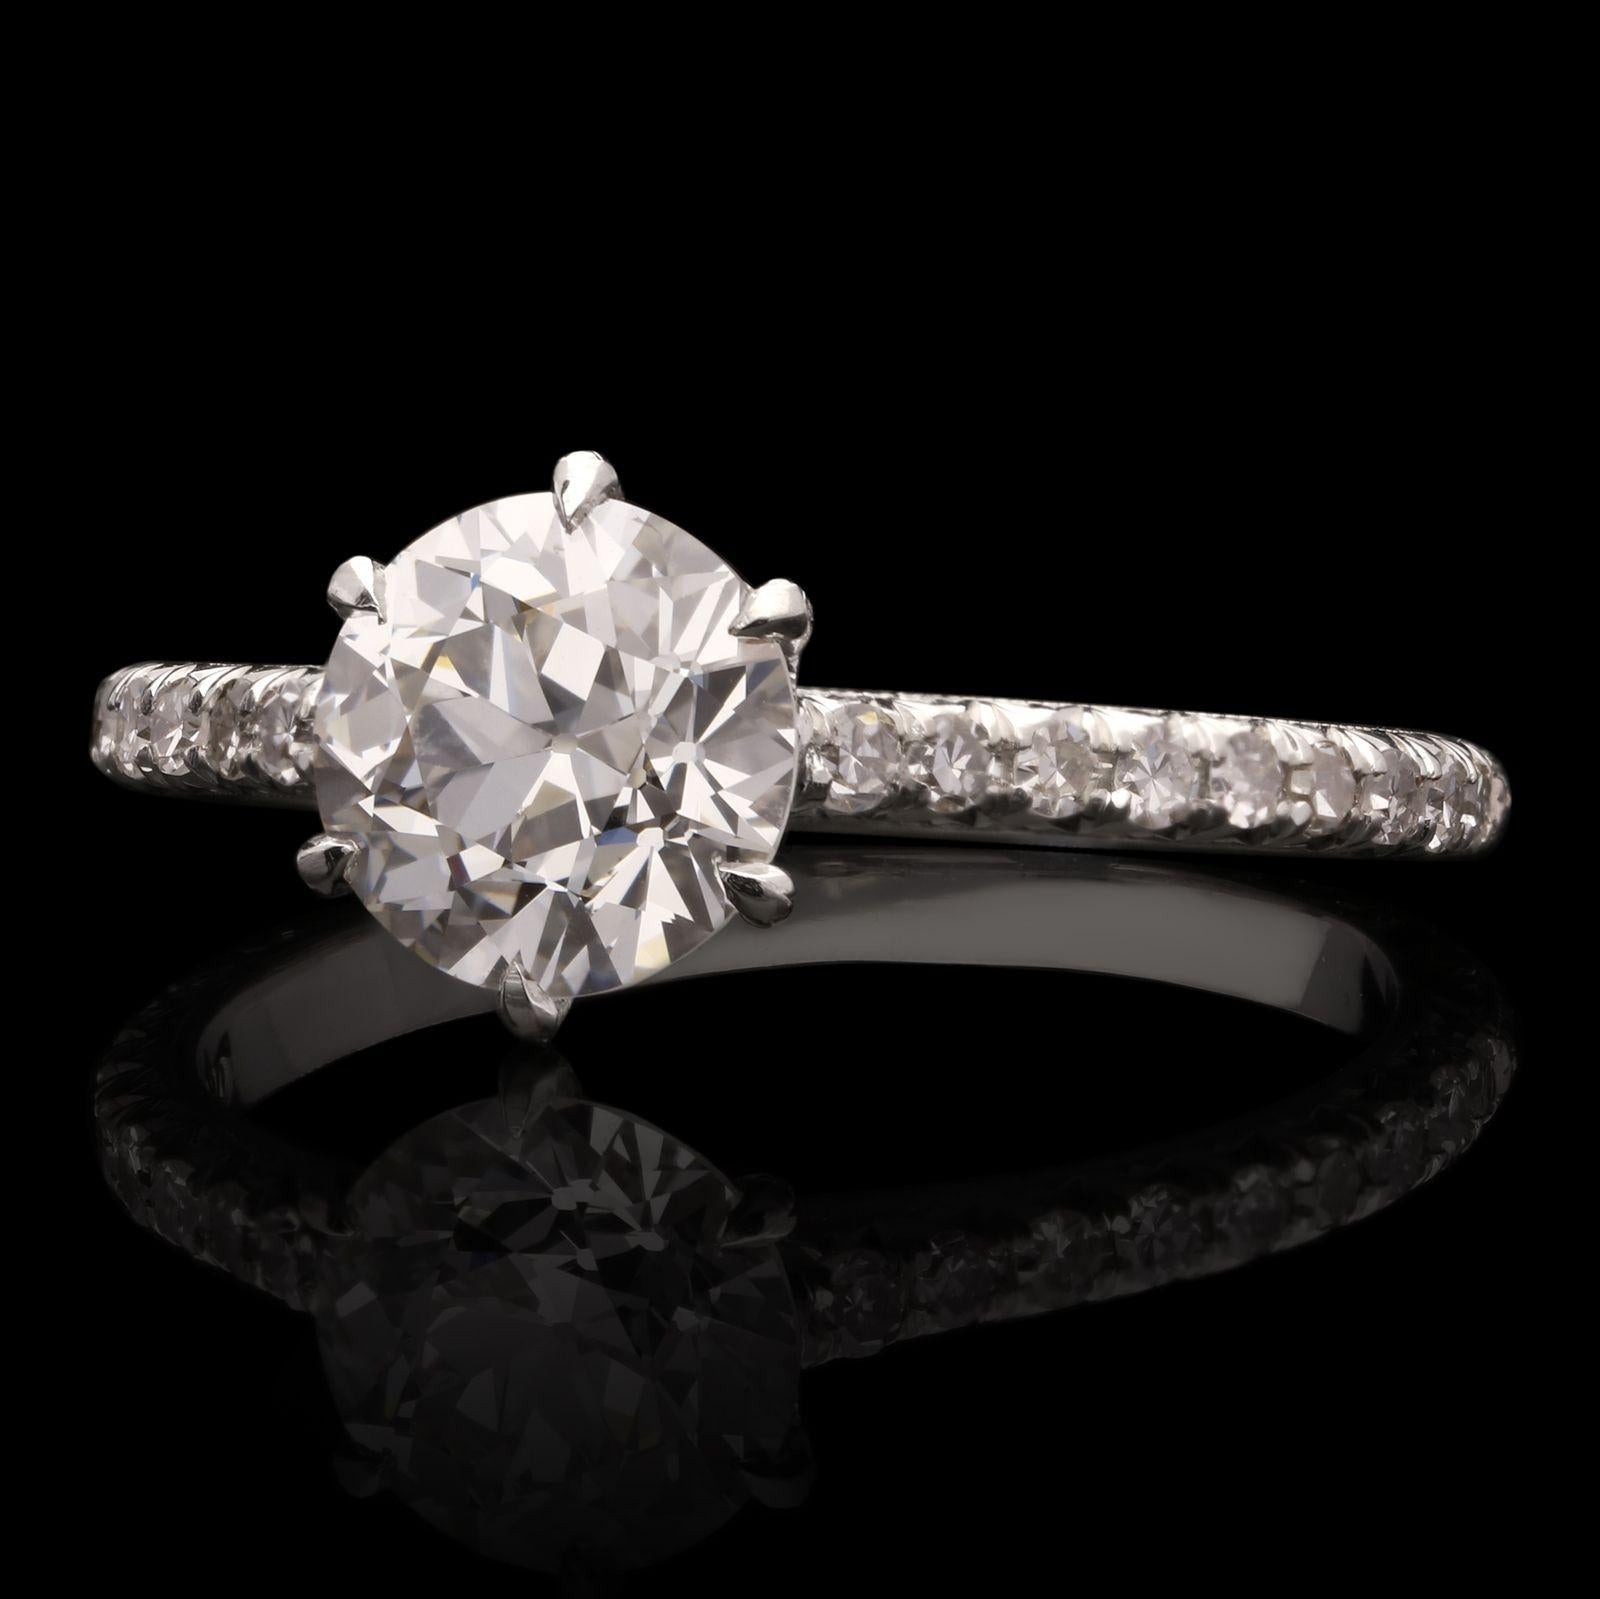 A classic diamond solitaire ring by Hancocks, centred on a beautiful old European brilliant cut diamond weighing 1.35cts and of F colour and VS2 clarity claw set in a handmade platinum mount with an open gallery embellished with diamonds and a fine